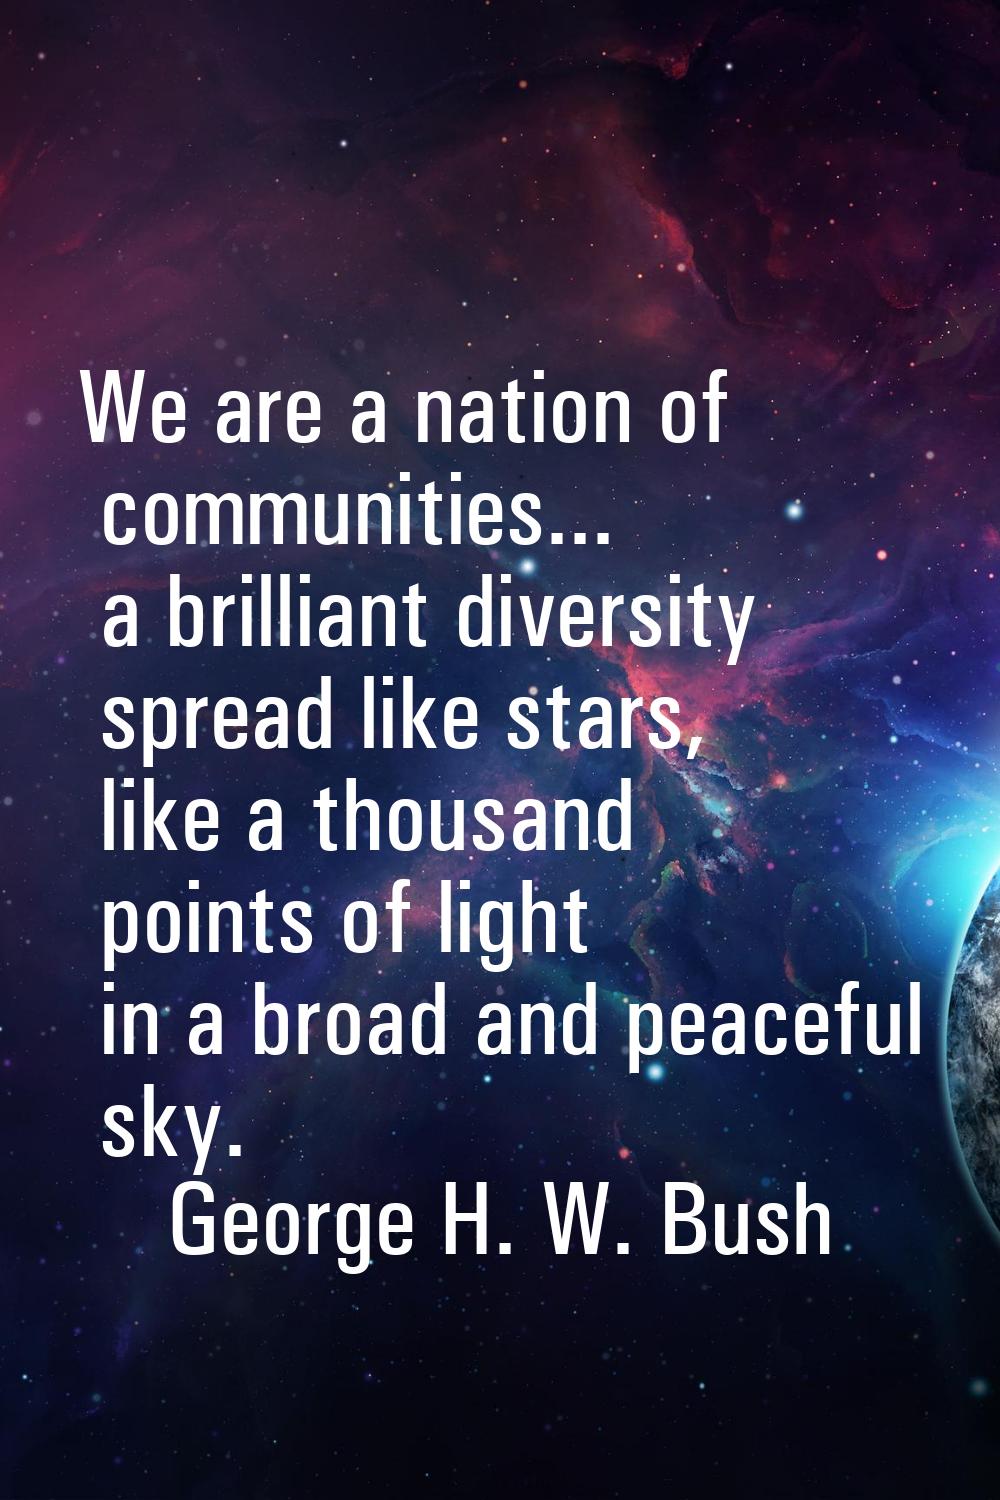 We are a nation of communities... a brilliant diversity spread like stars, like a thousand points o